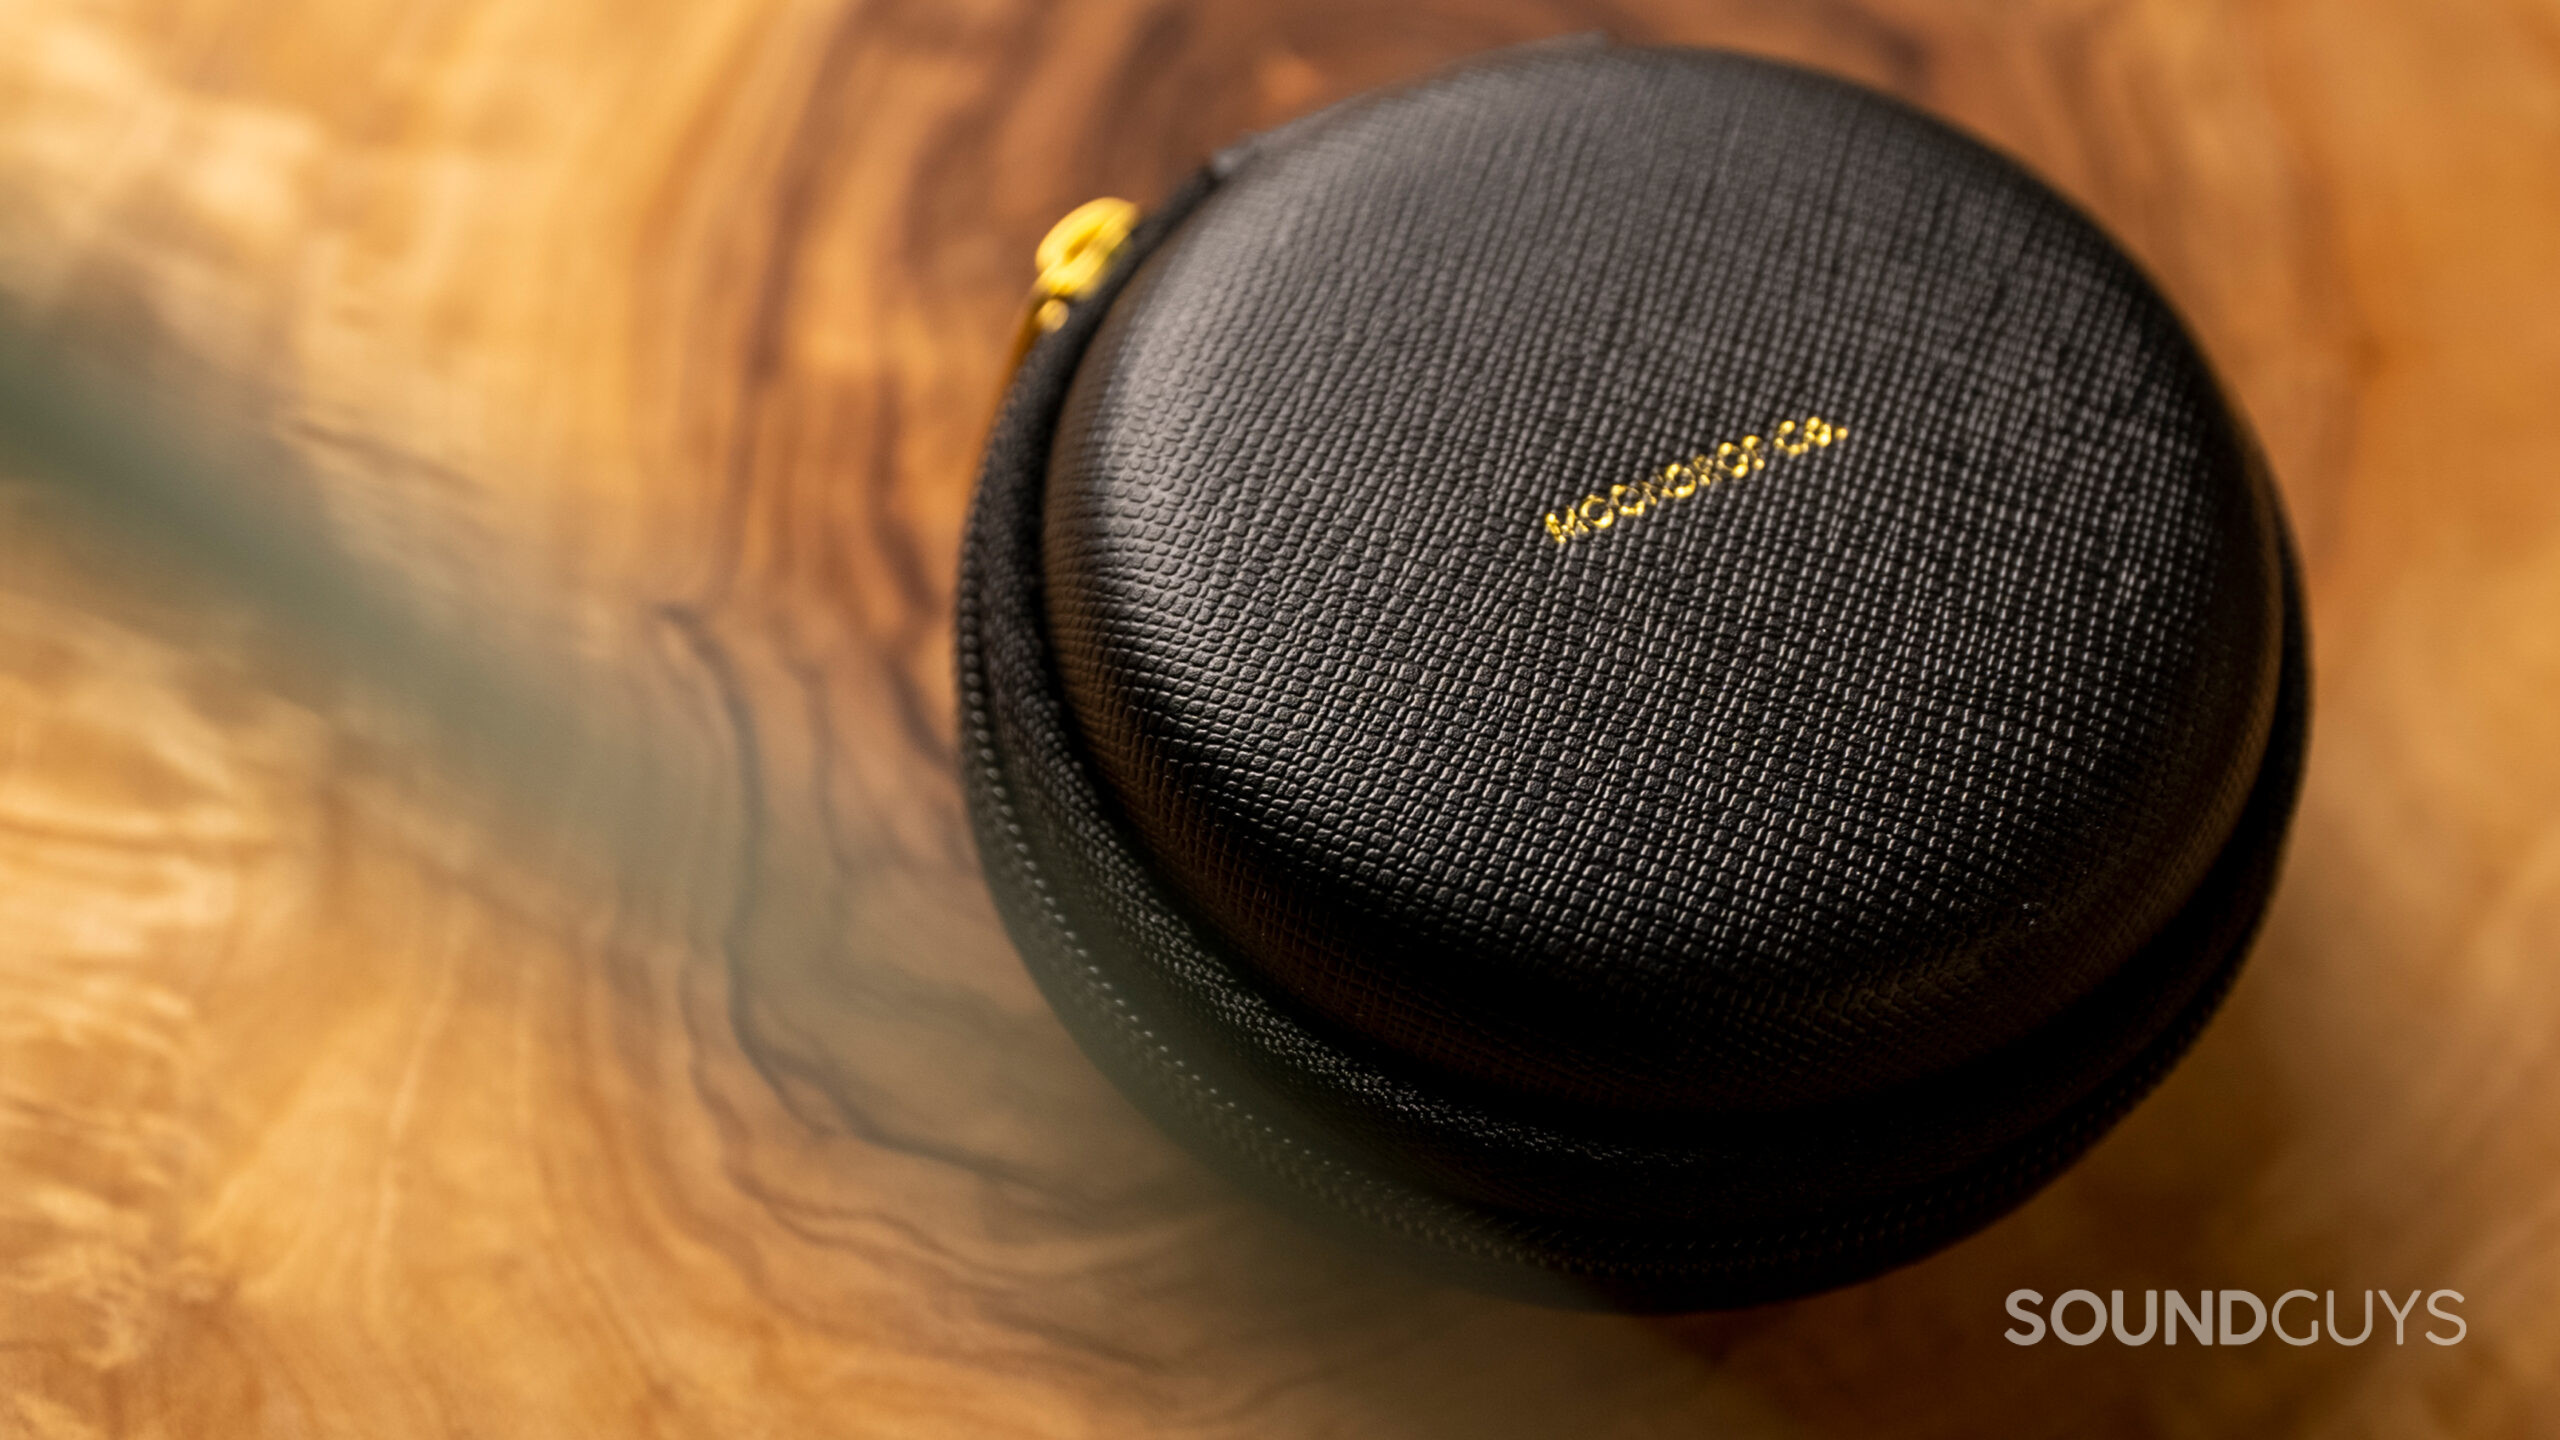 The Moondrop Aria zip case rests on a wood surface.